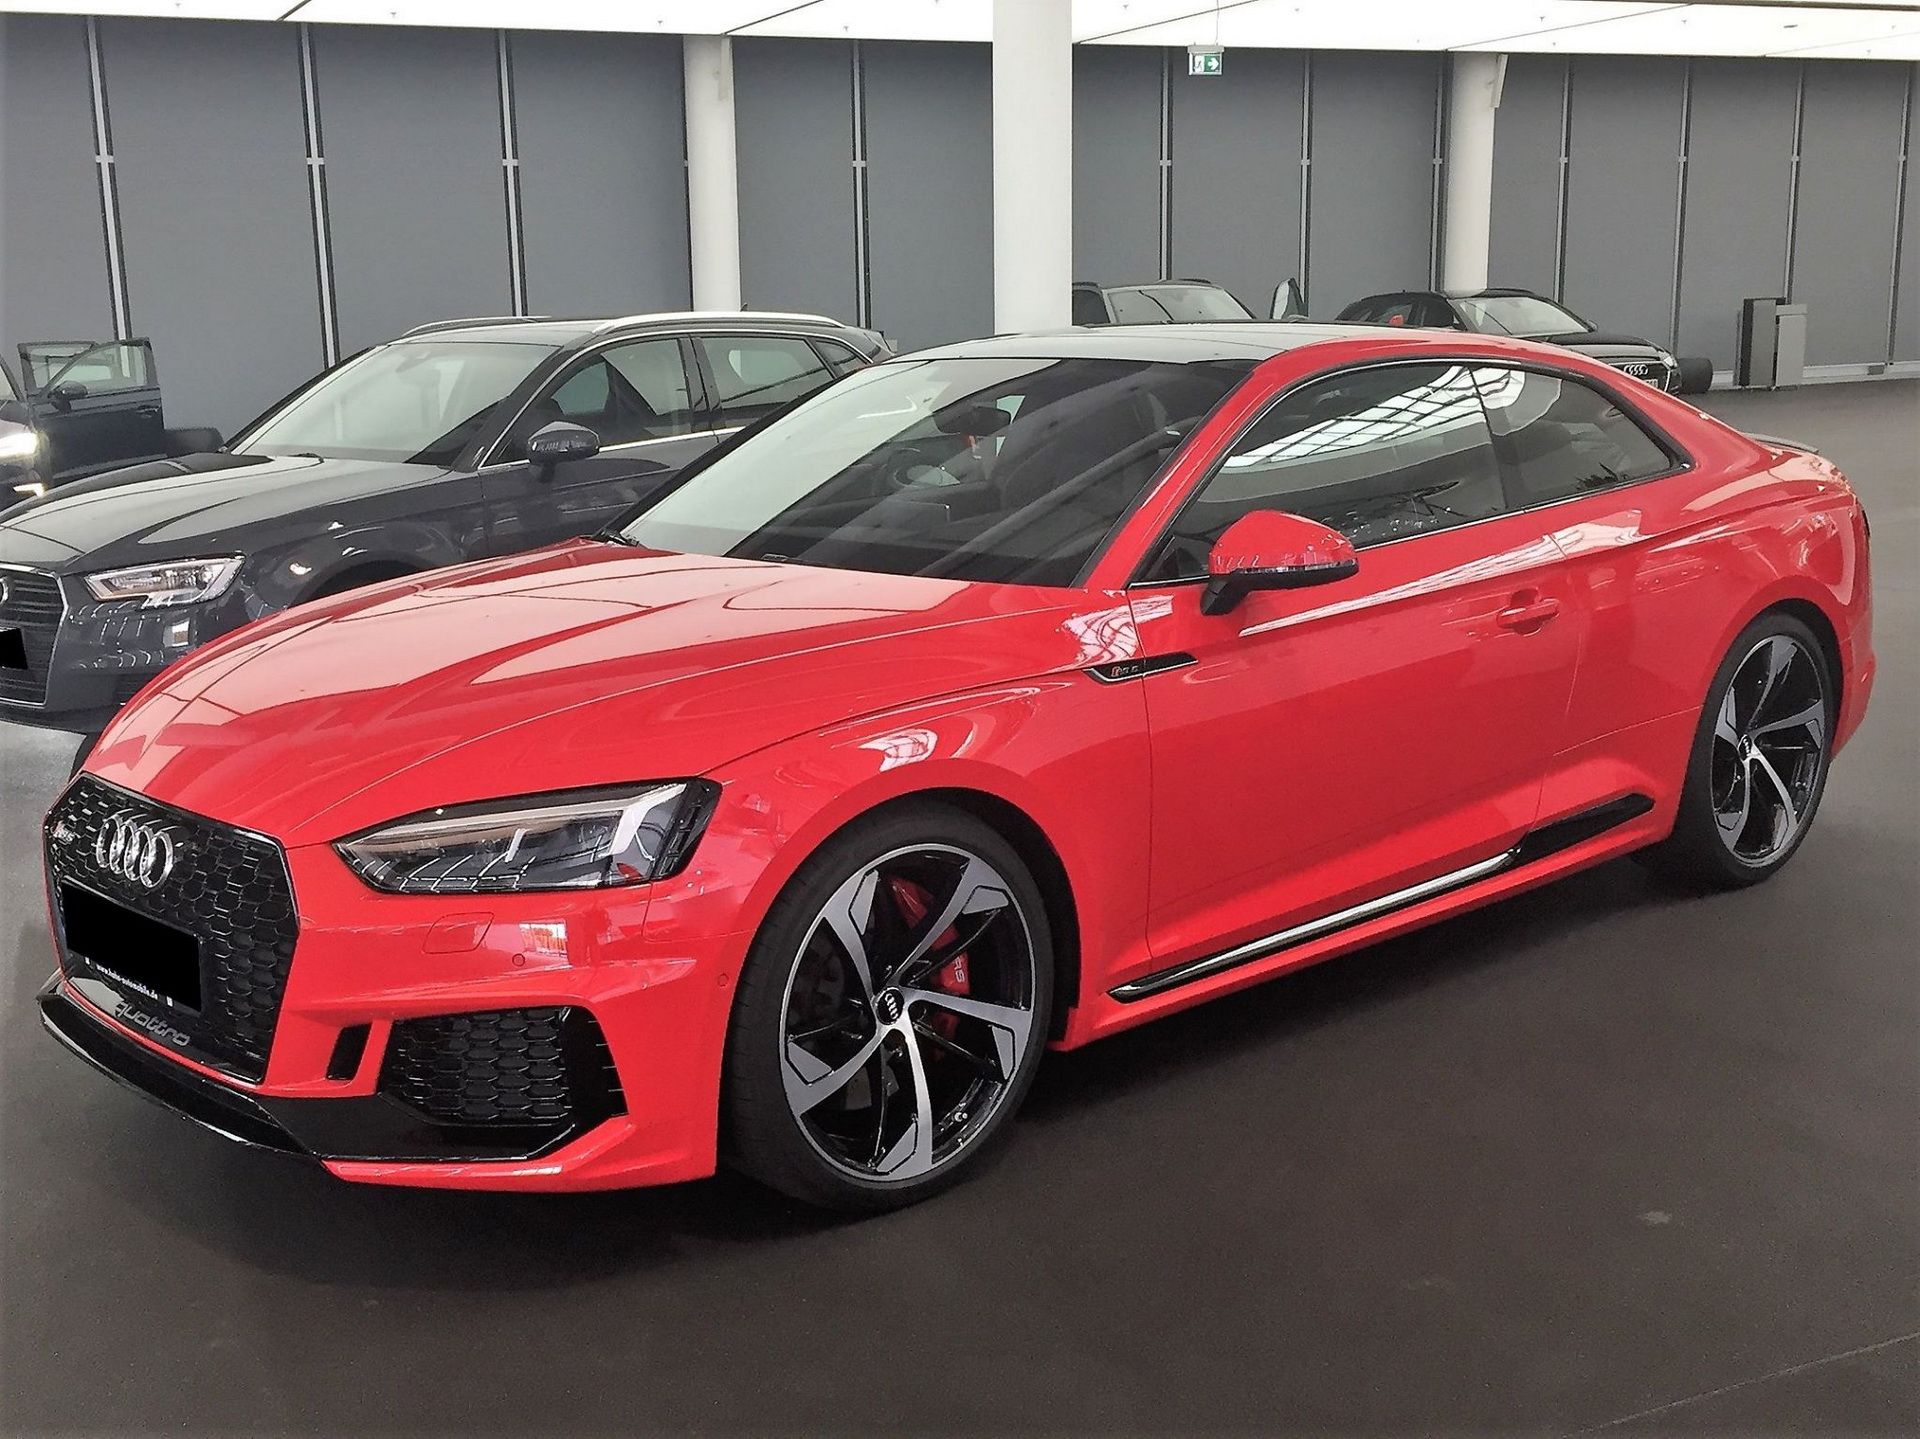 Misano Red Pearl Audi RS5 Was Painted To Stand Out In The | Carscoops